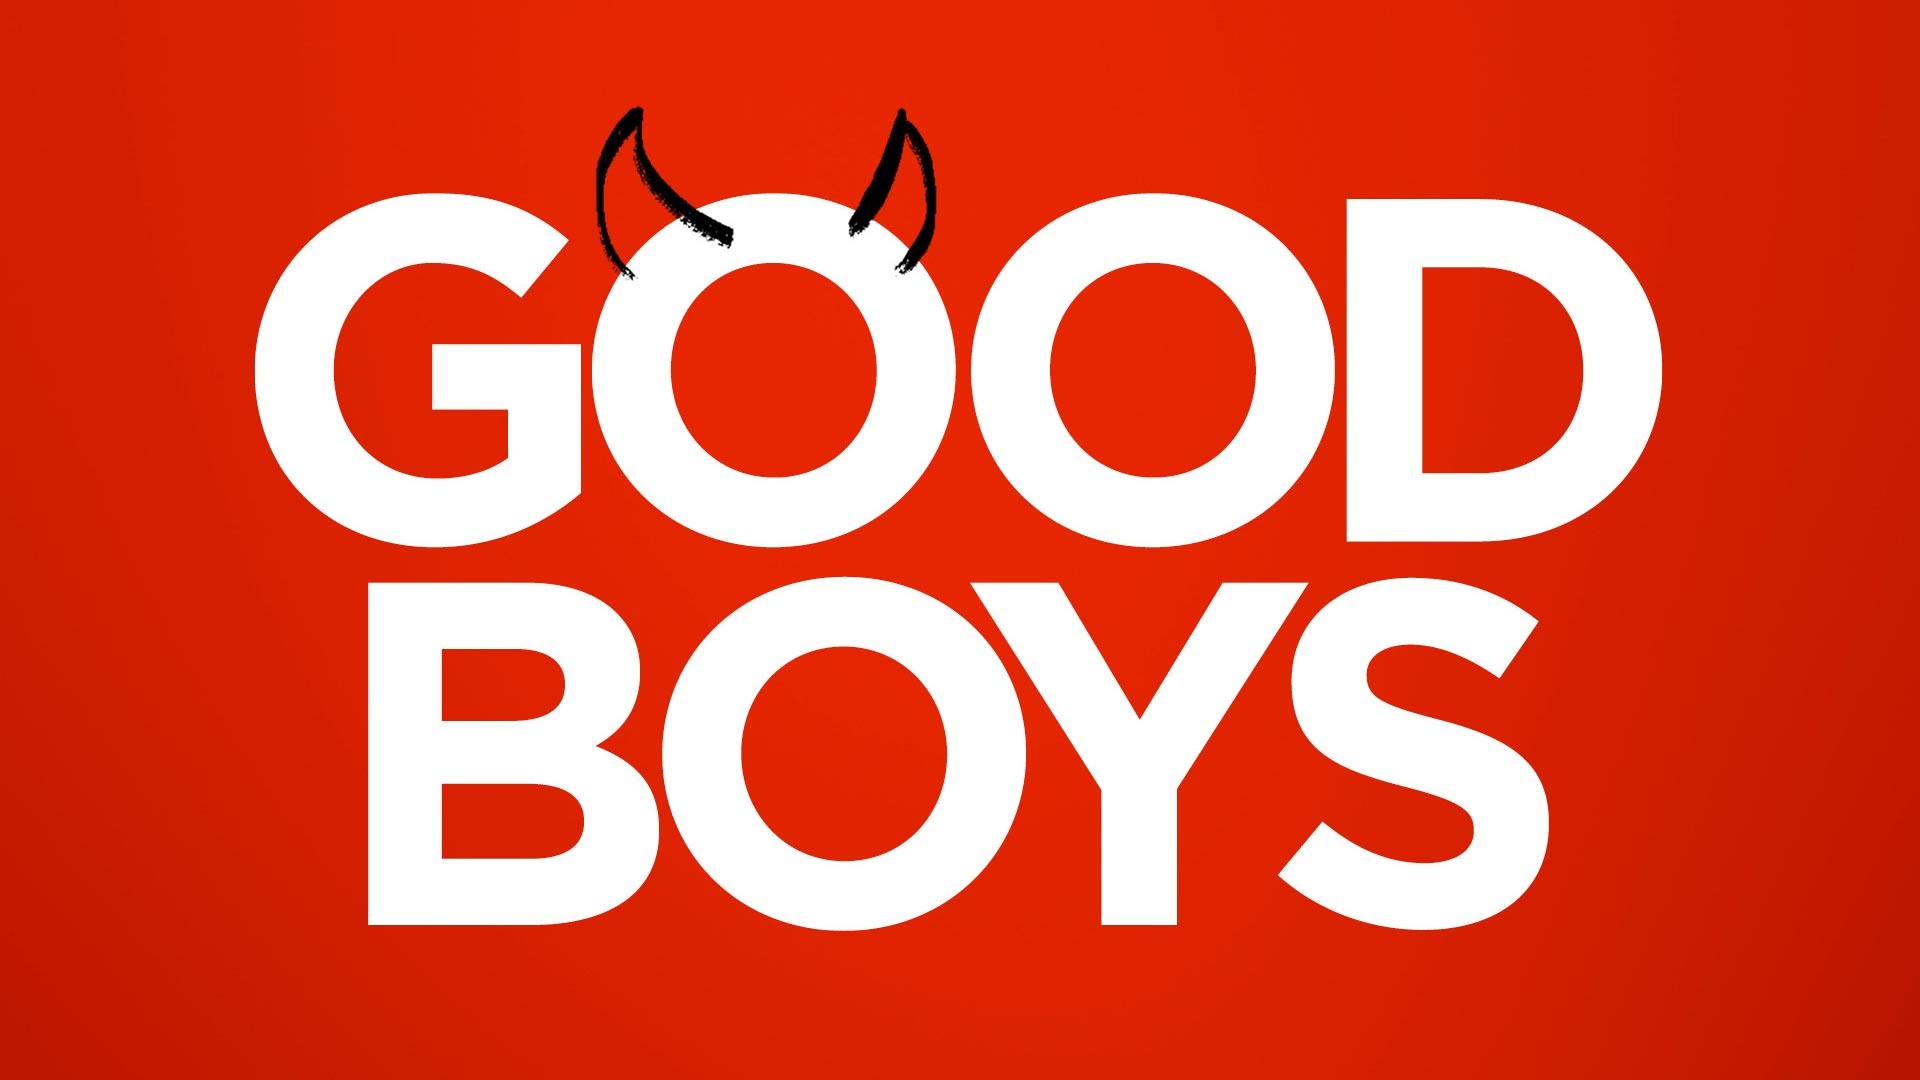 Good Boys 2019 film, Coming-of-age story, Pre-teen humor, R-rated comedy, 1920x1080 Full HD Desktop